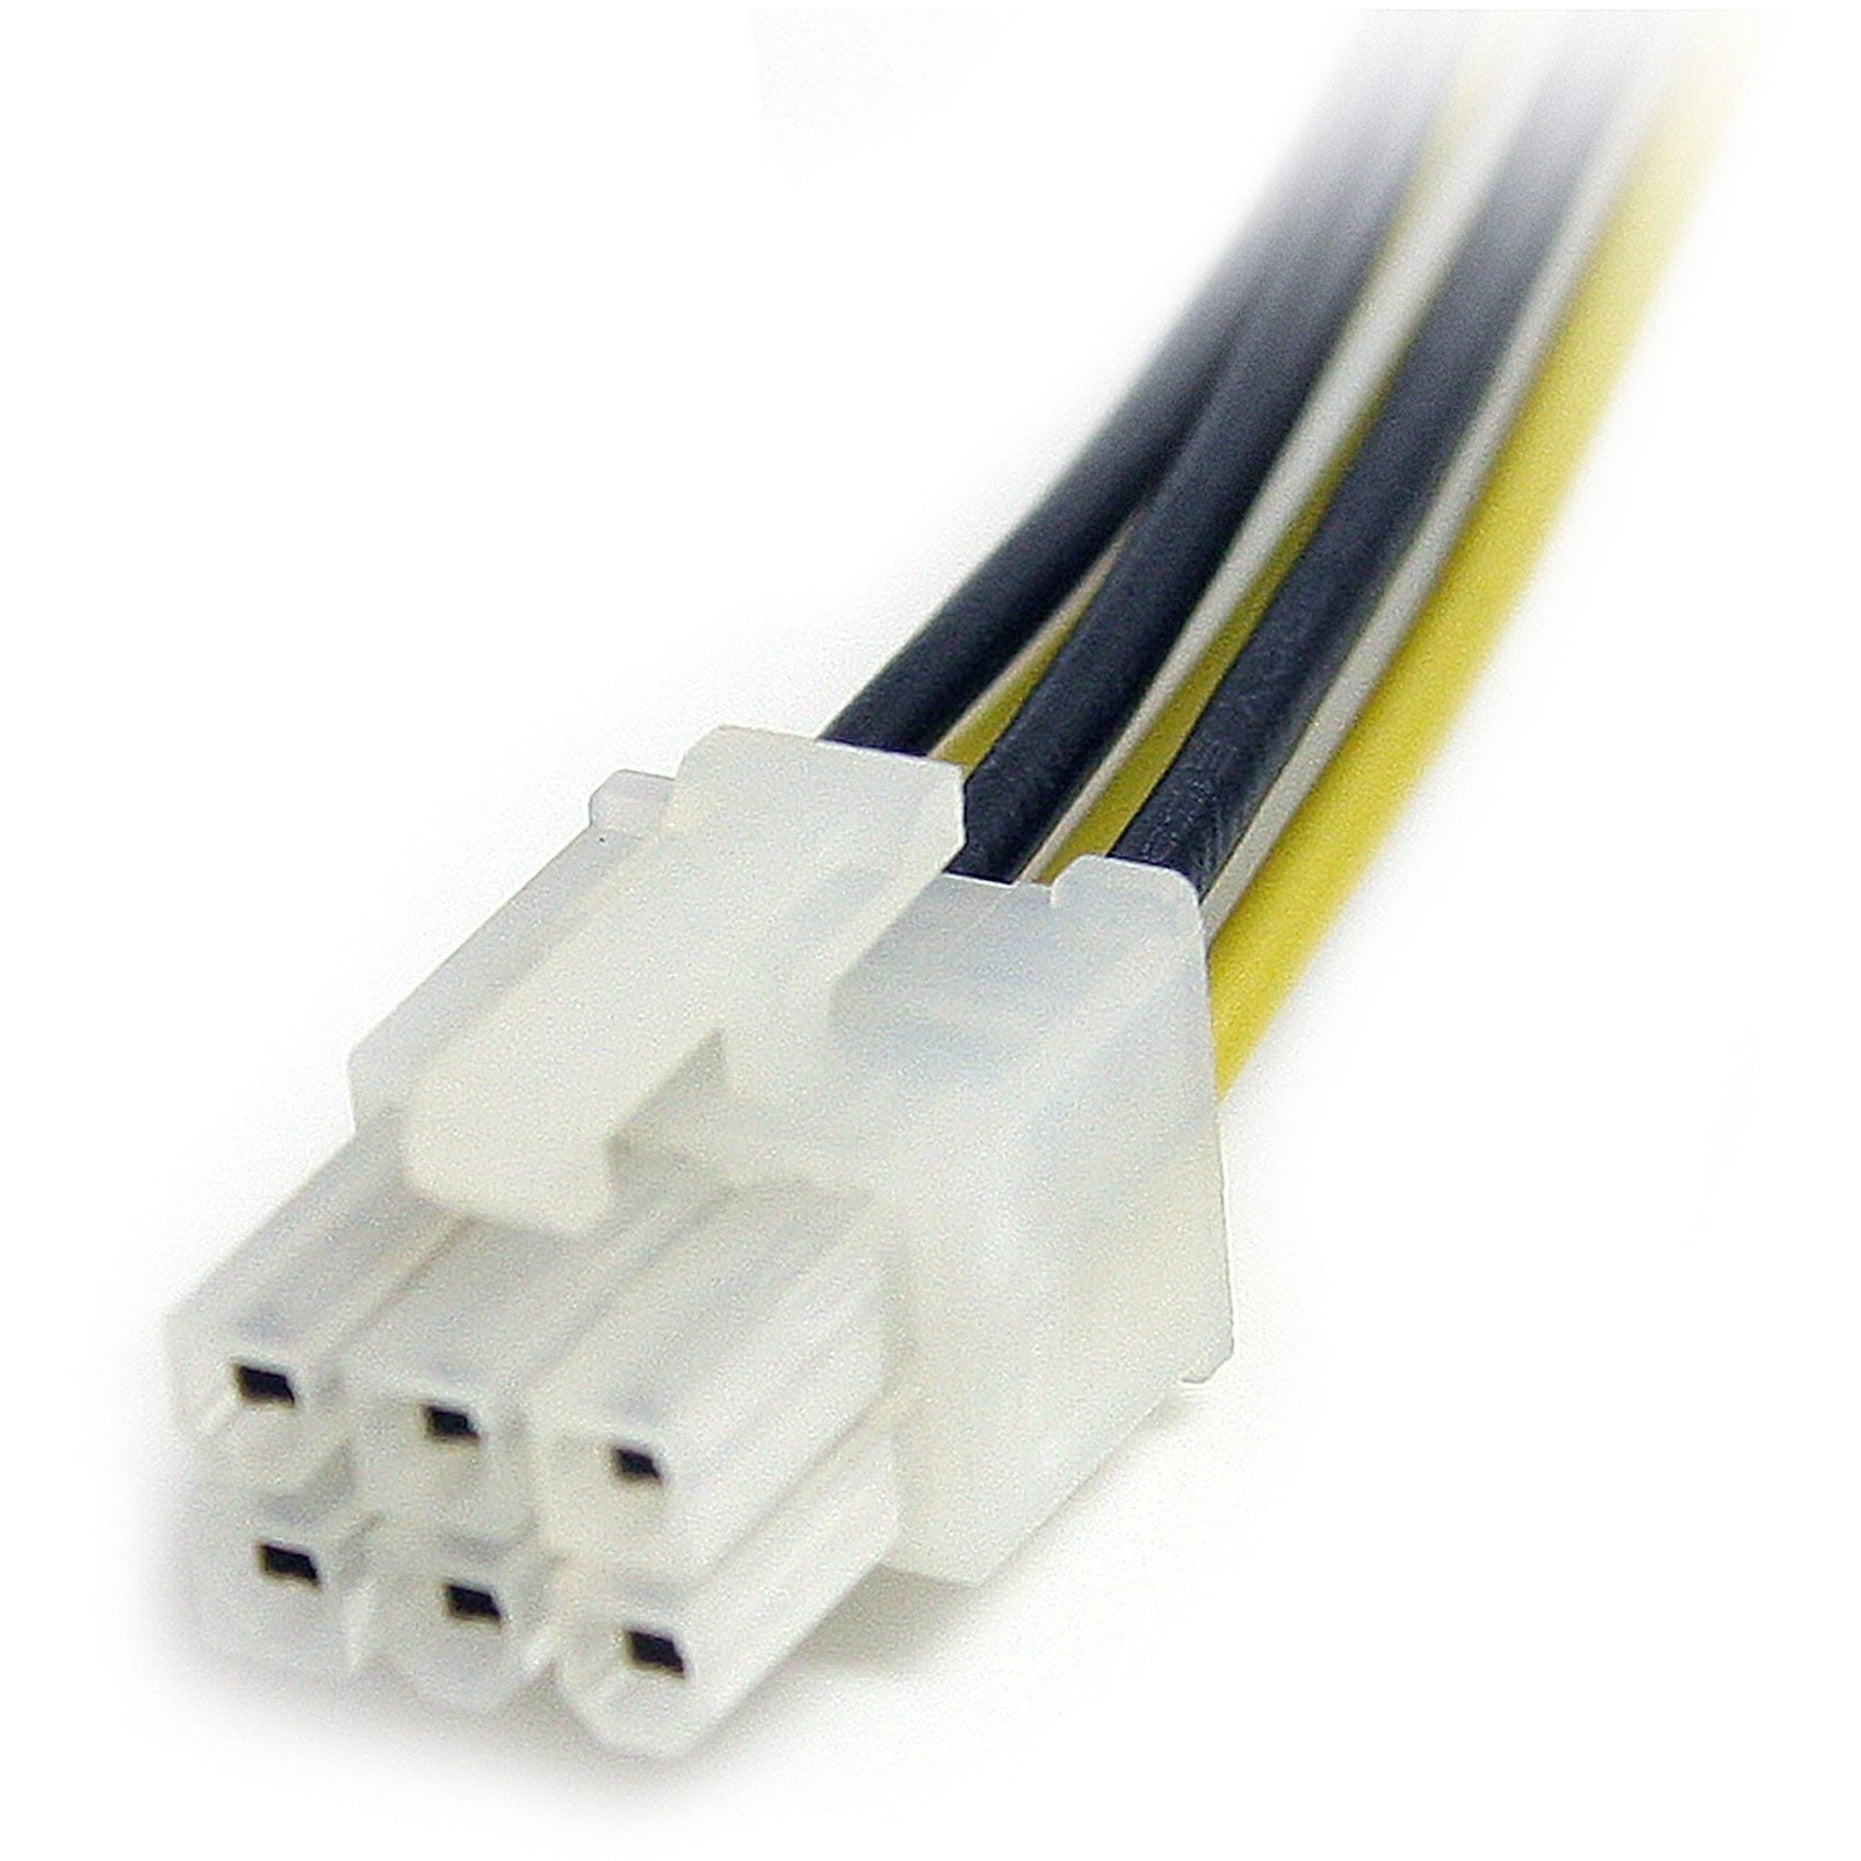 StarTech.com PCIEXSPLIT6 6in PCI Express Power Splitter Cable, Connect Multiple Gaming/Video Cards [Discontinued]